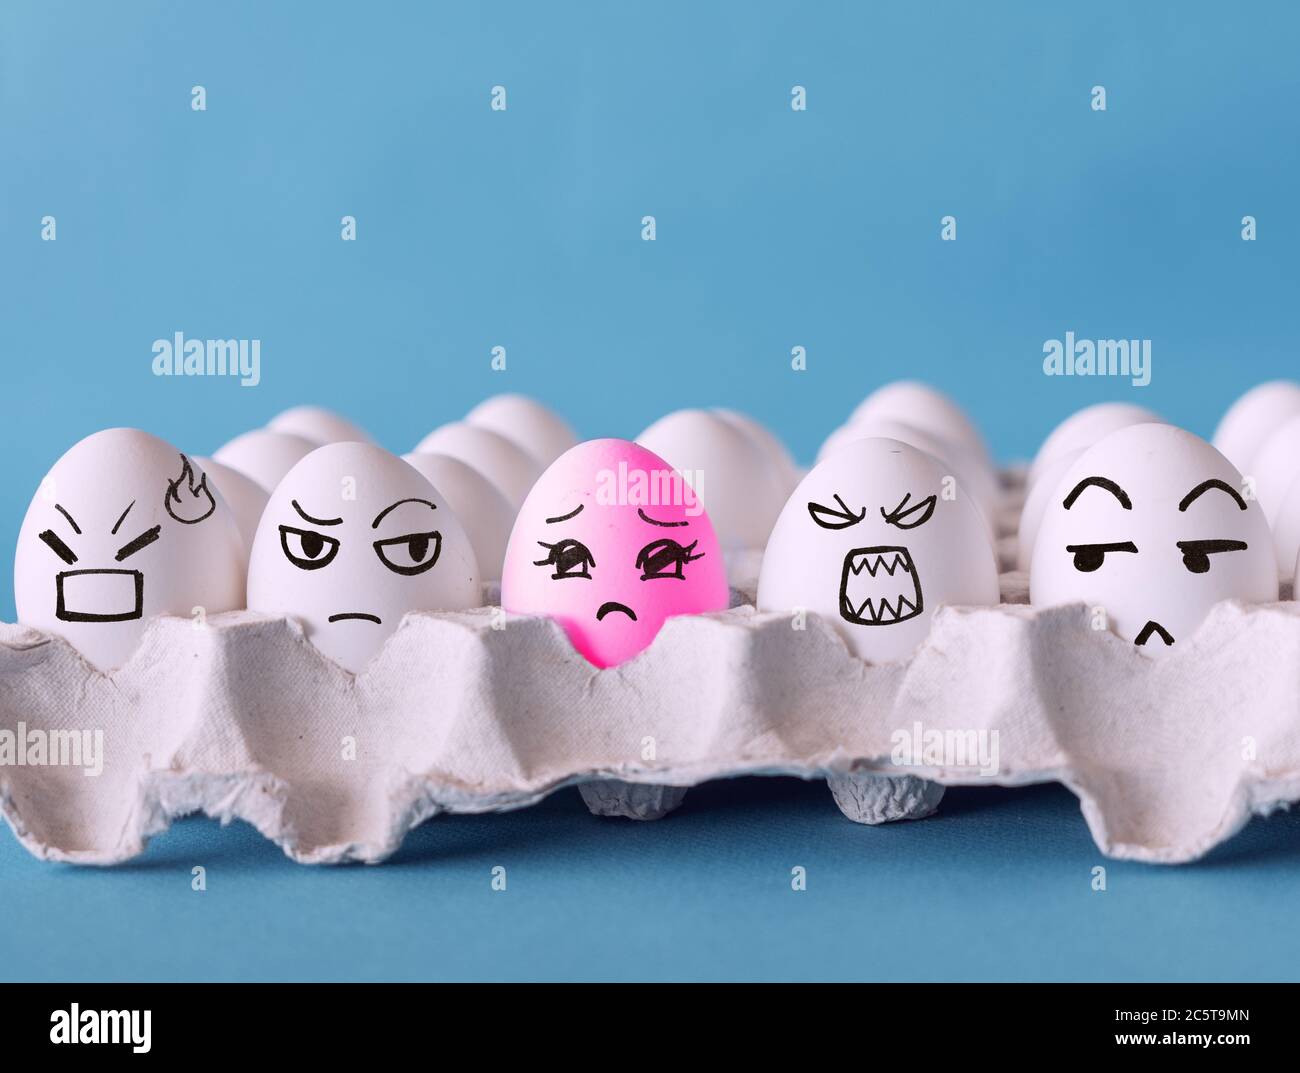 The odd one, Faces on the eggs, no to racism, discrimination concept with blue background Stock Photo